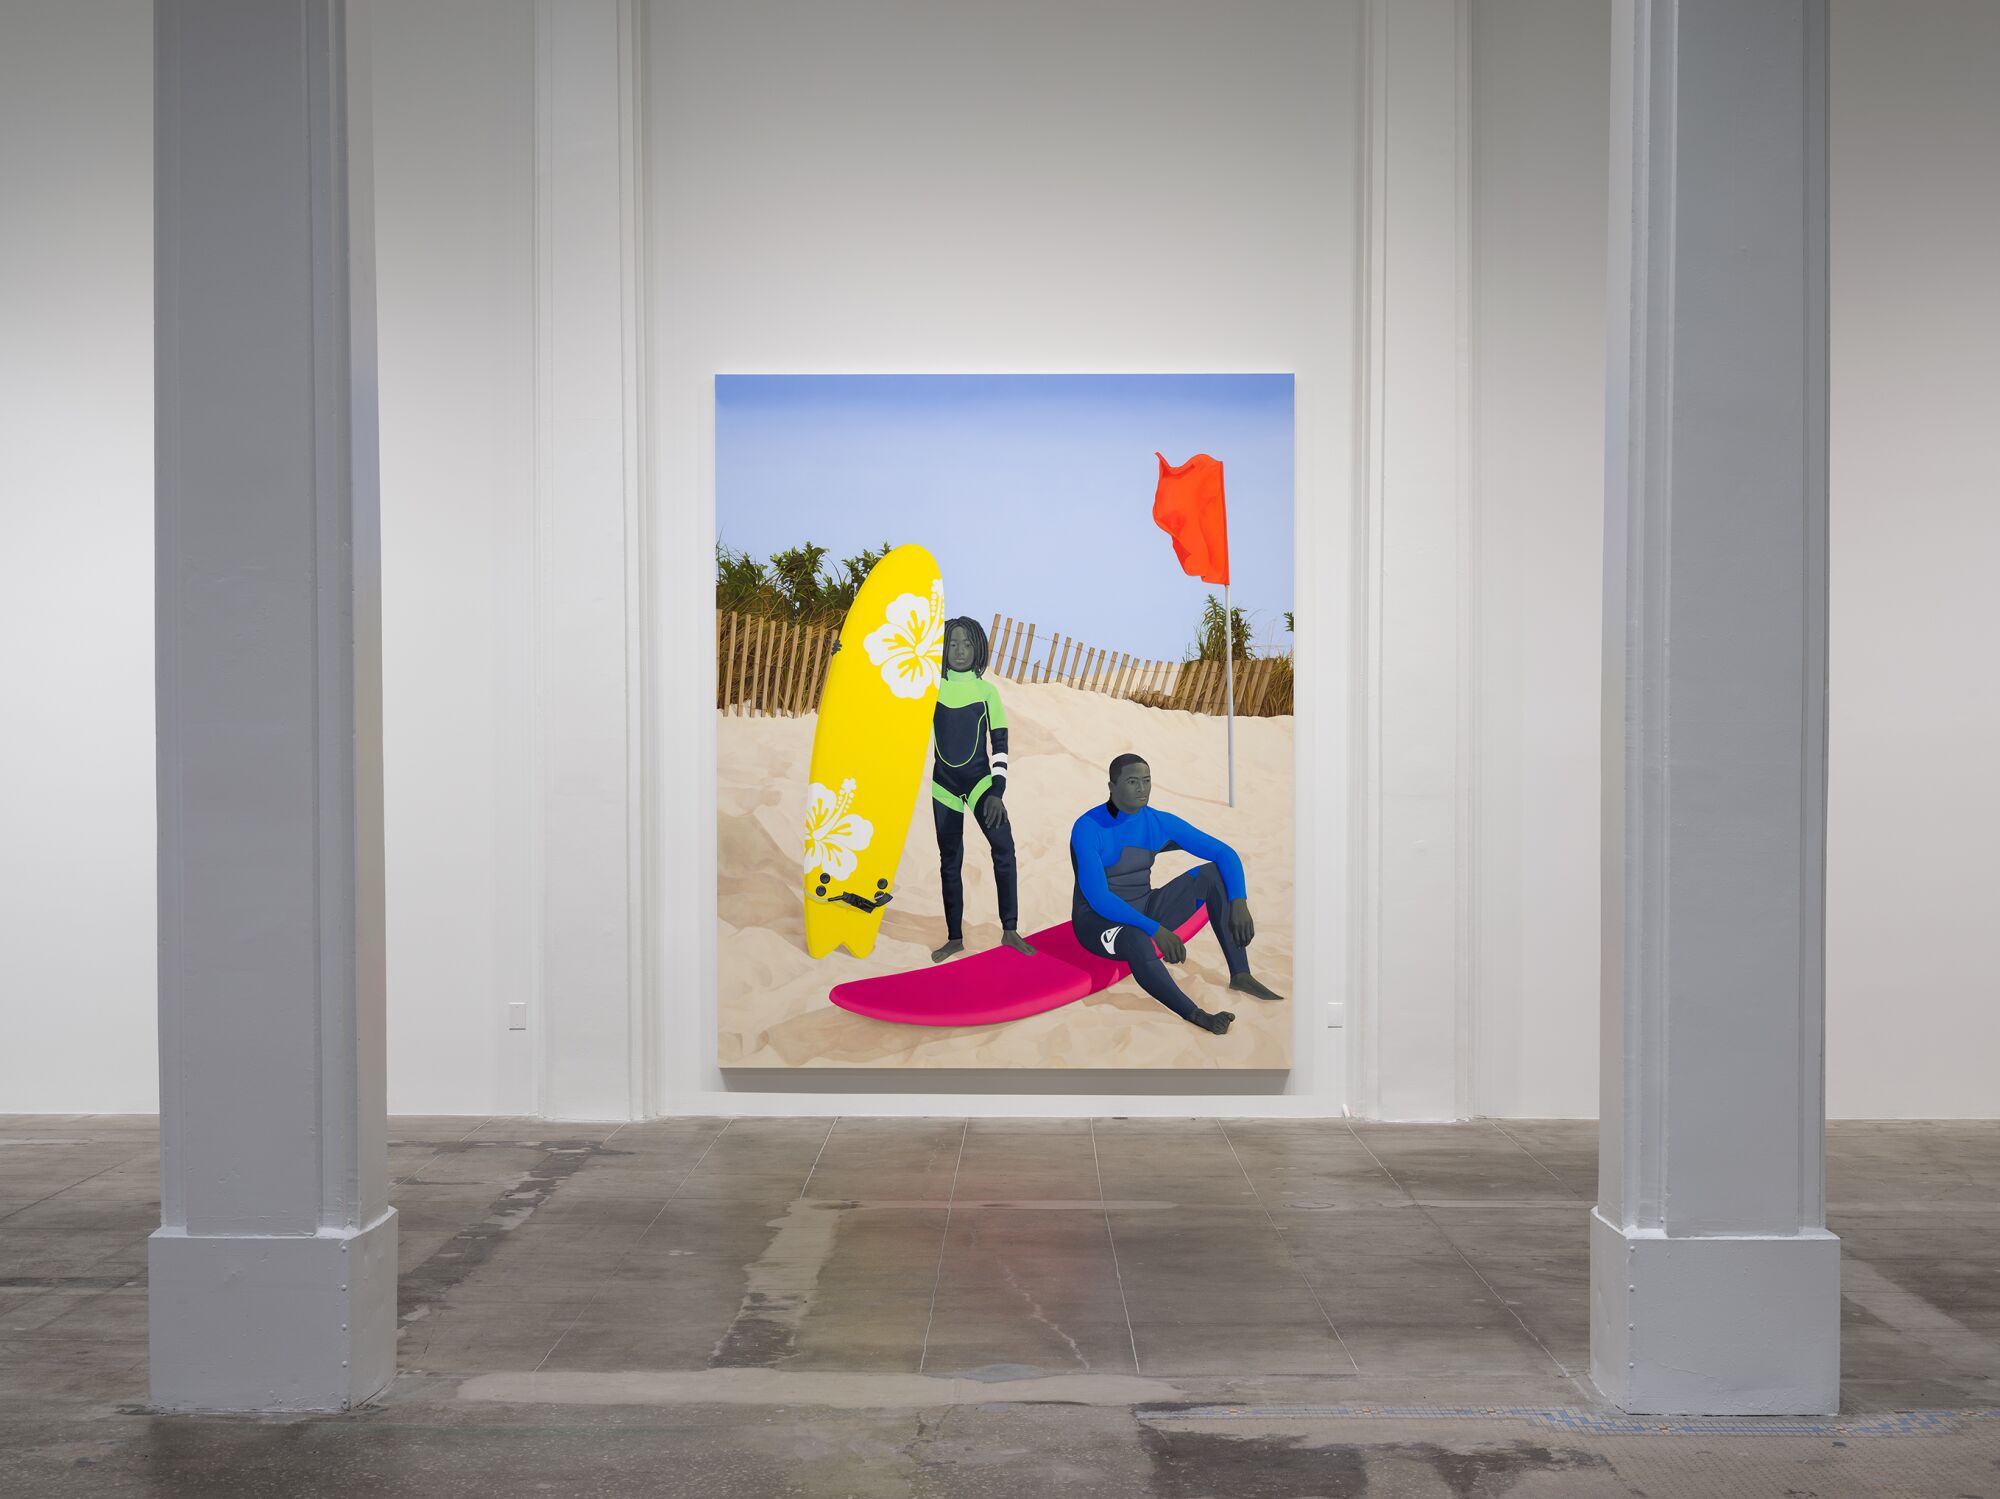 View of "Amy Sherald: The Great American Fact" at the Hauser & Wirth gallery.